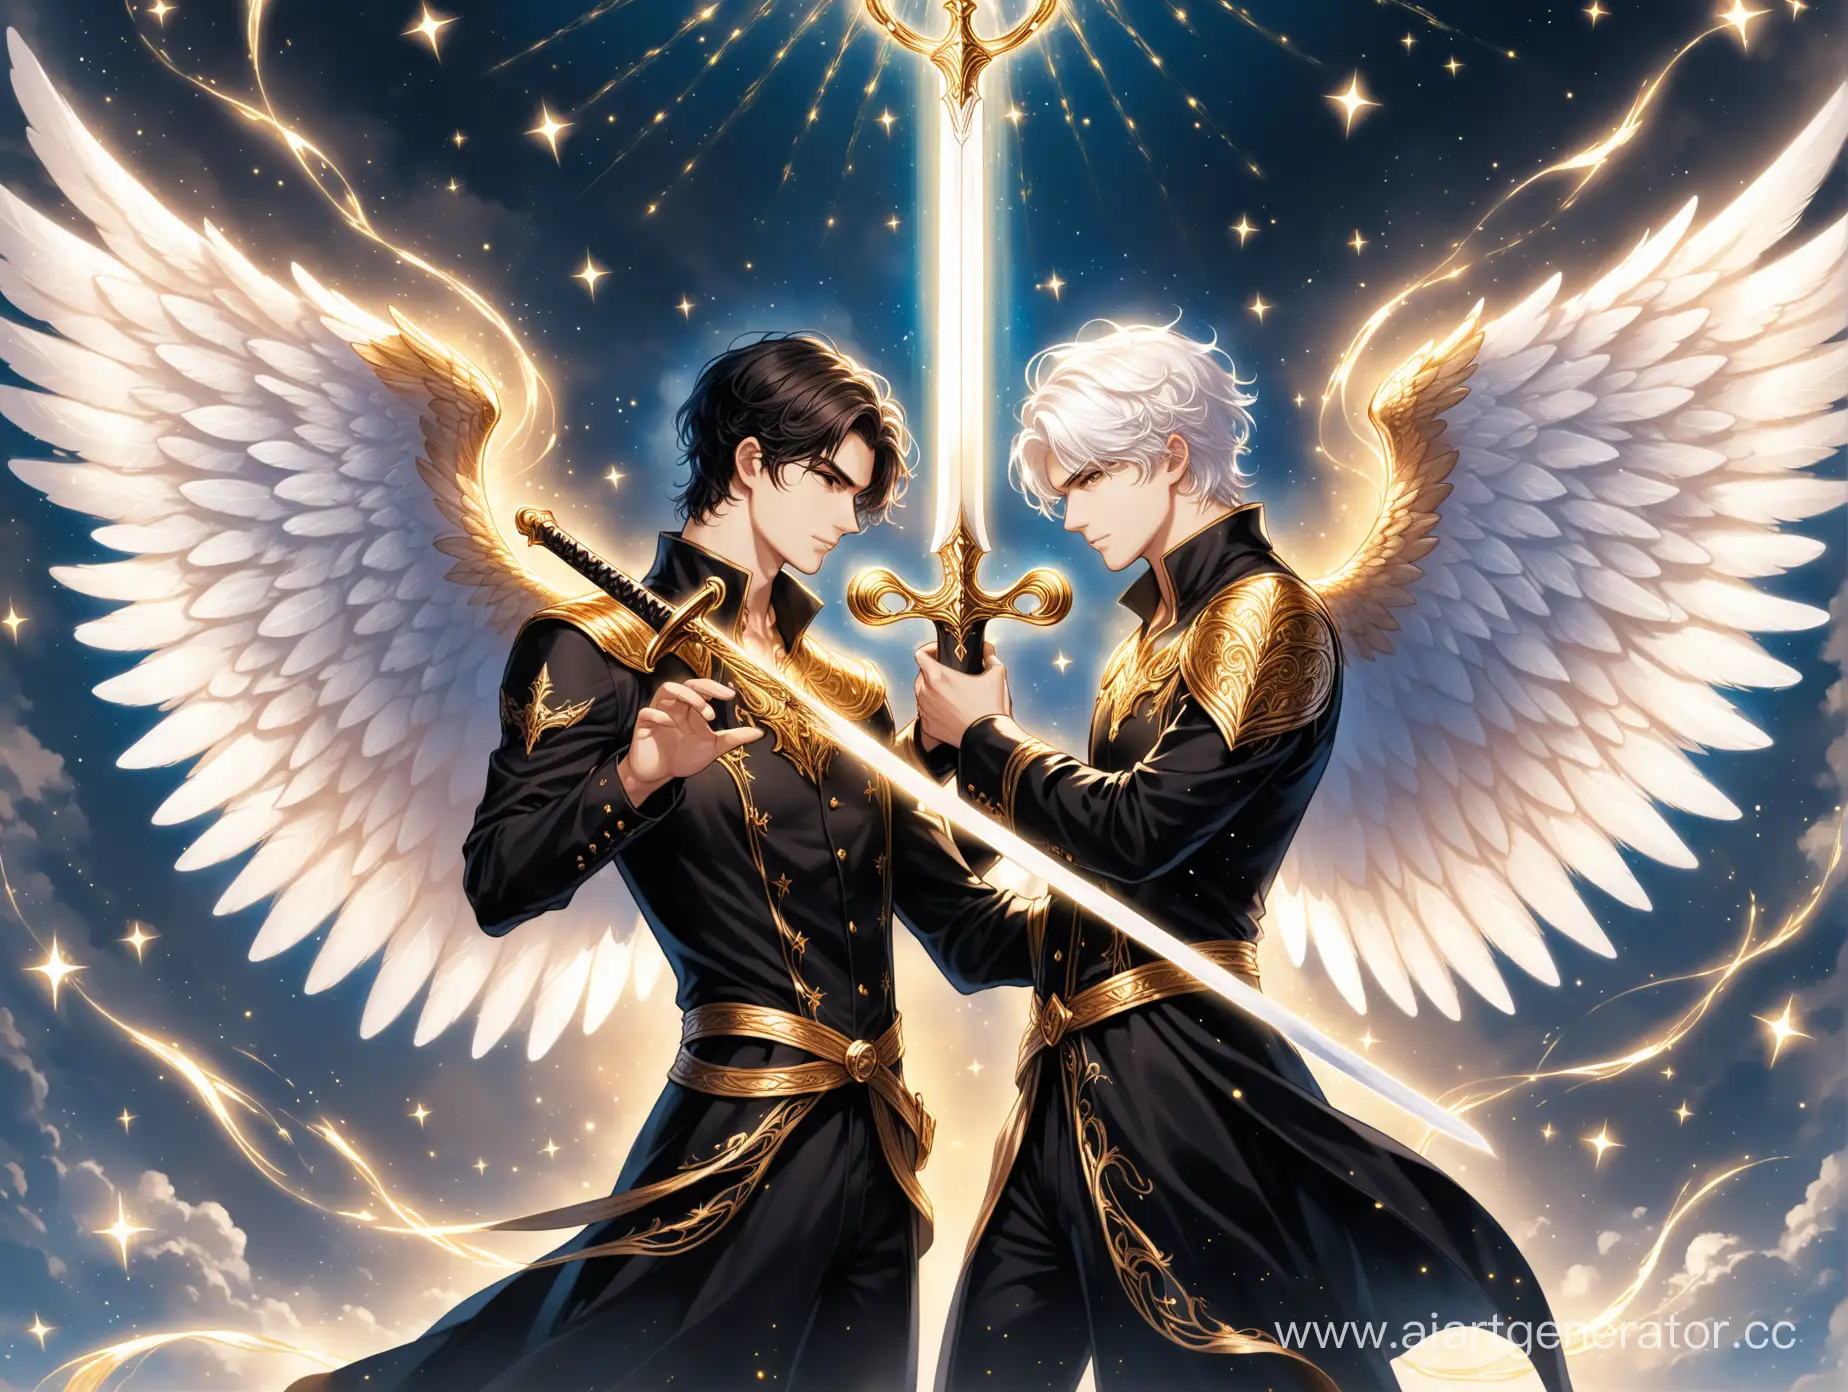 Guardian-Angel-Protecting-Young-Man-with-White-Hair